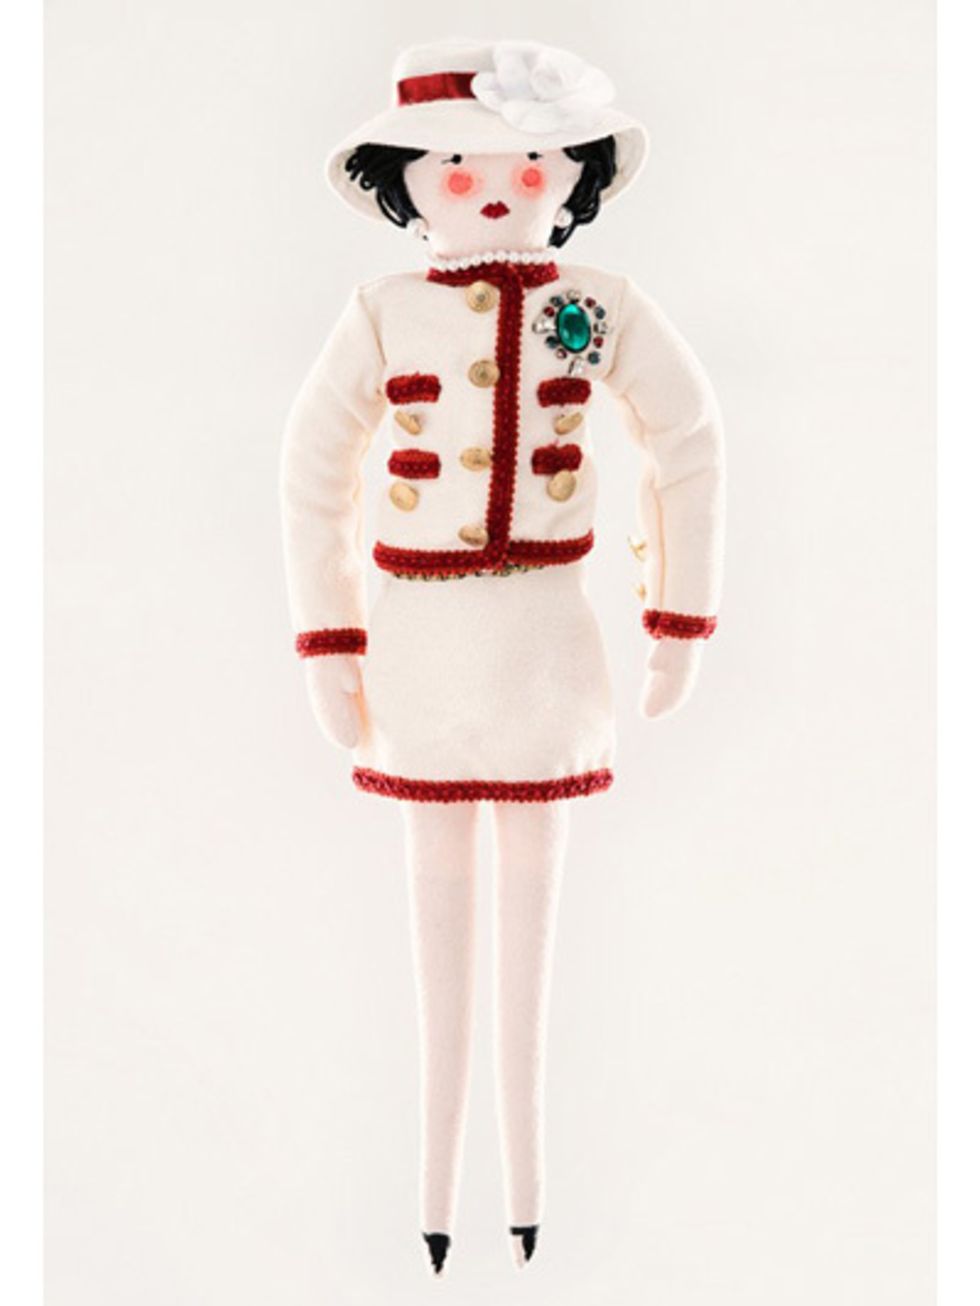 Sleeve, Hat, Standing, White, Costume accessory, Winter, Carmine, Costume design, Snowman, Fictional character, 